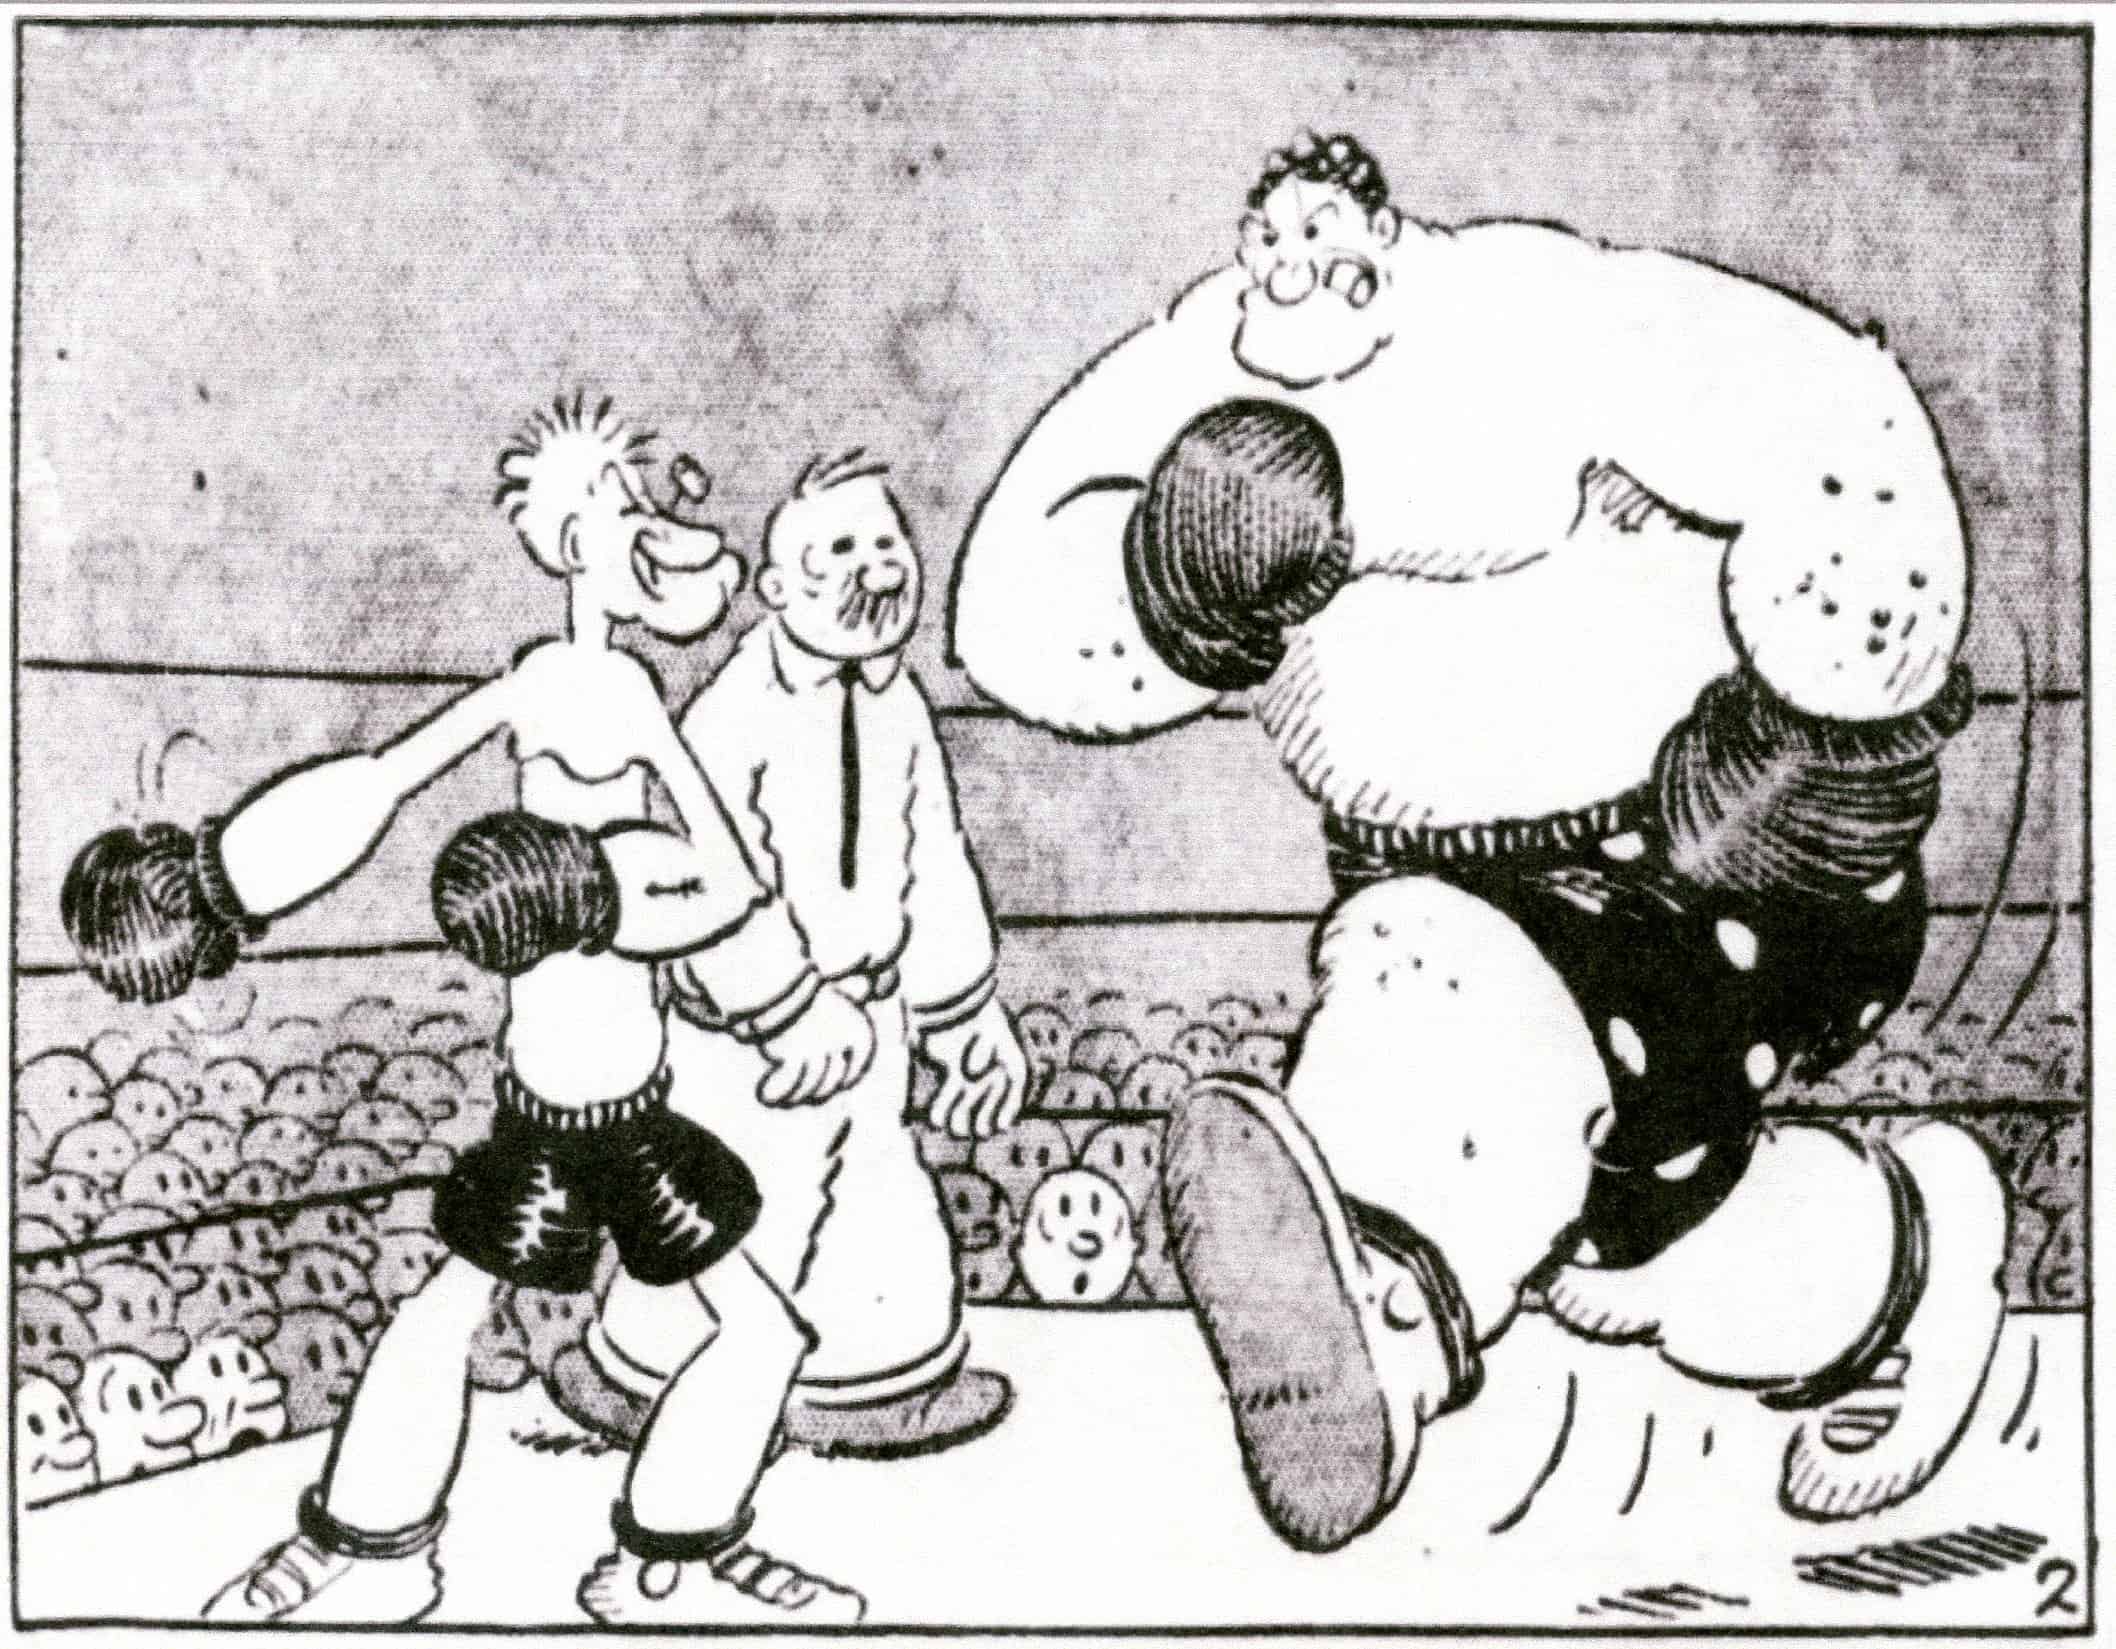 An unamed referee resembling J. Wellington Wimpy debuted in the Thimble Theatre comic strip on May 3 1931. By E.C. Segar